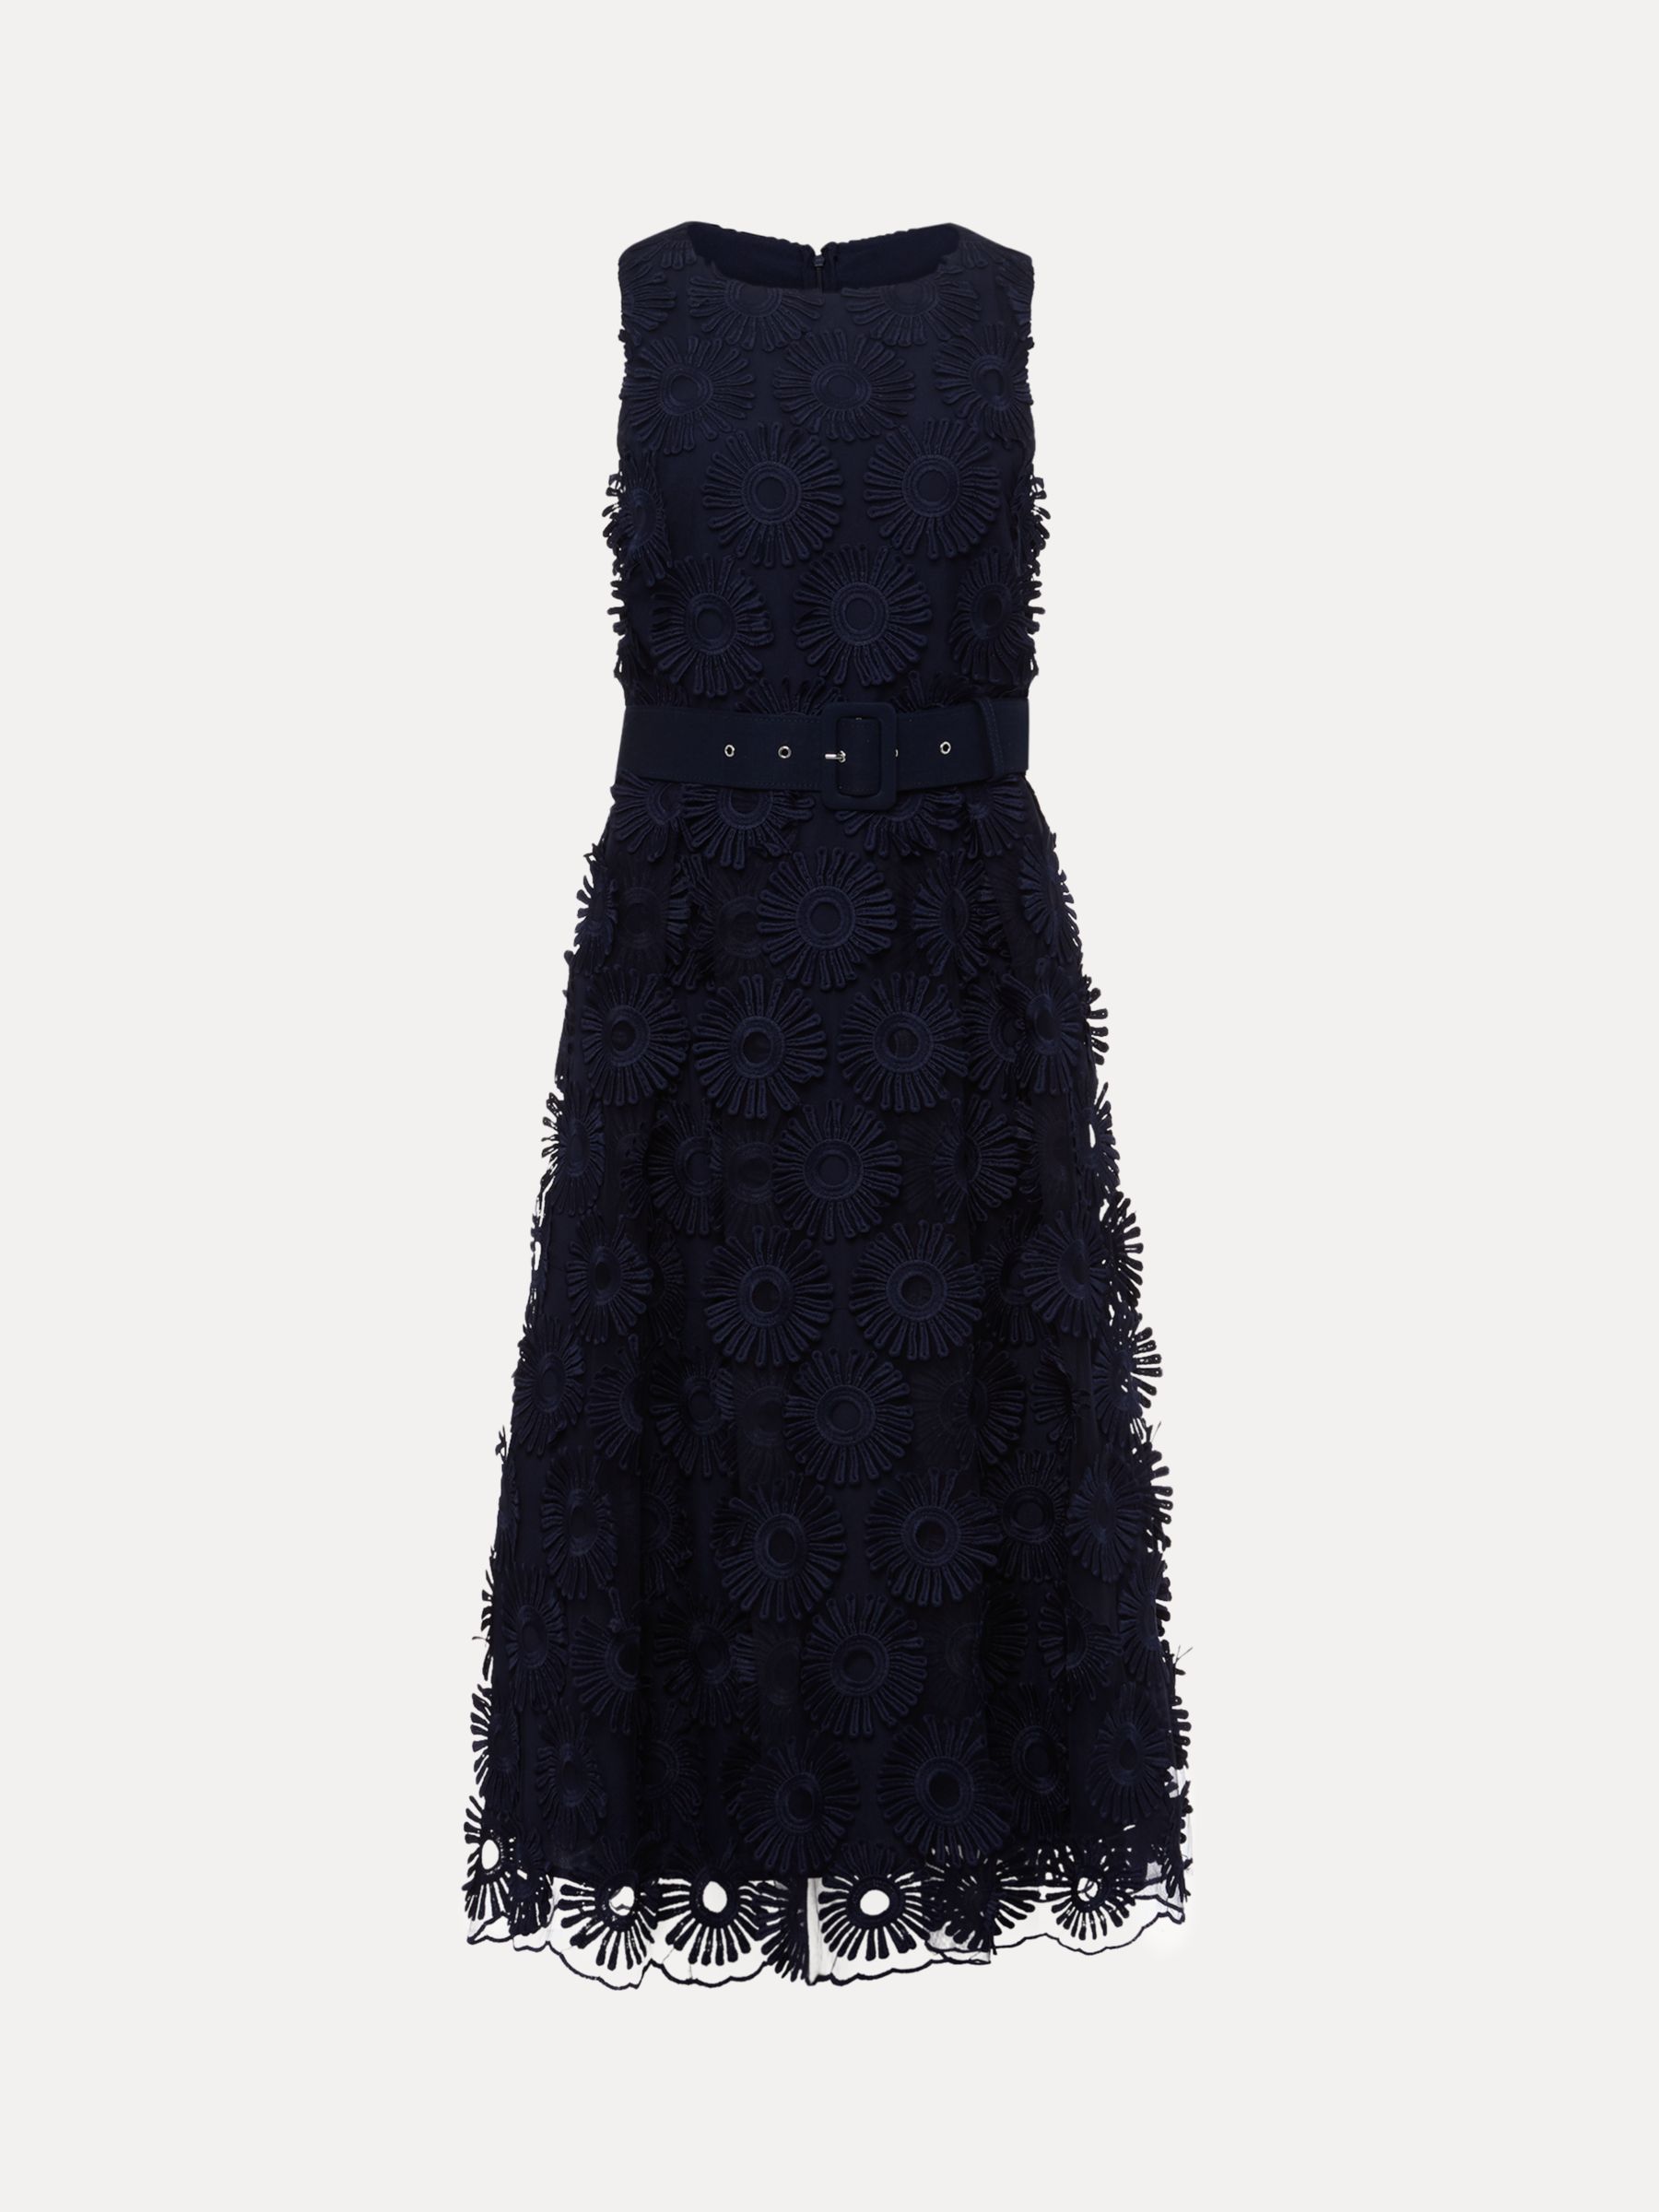 Phase Eight Flossy Lace Midi Dress, Navy at John Lewis & Partners